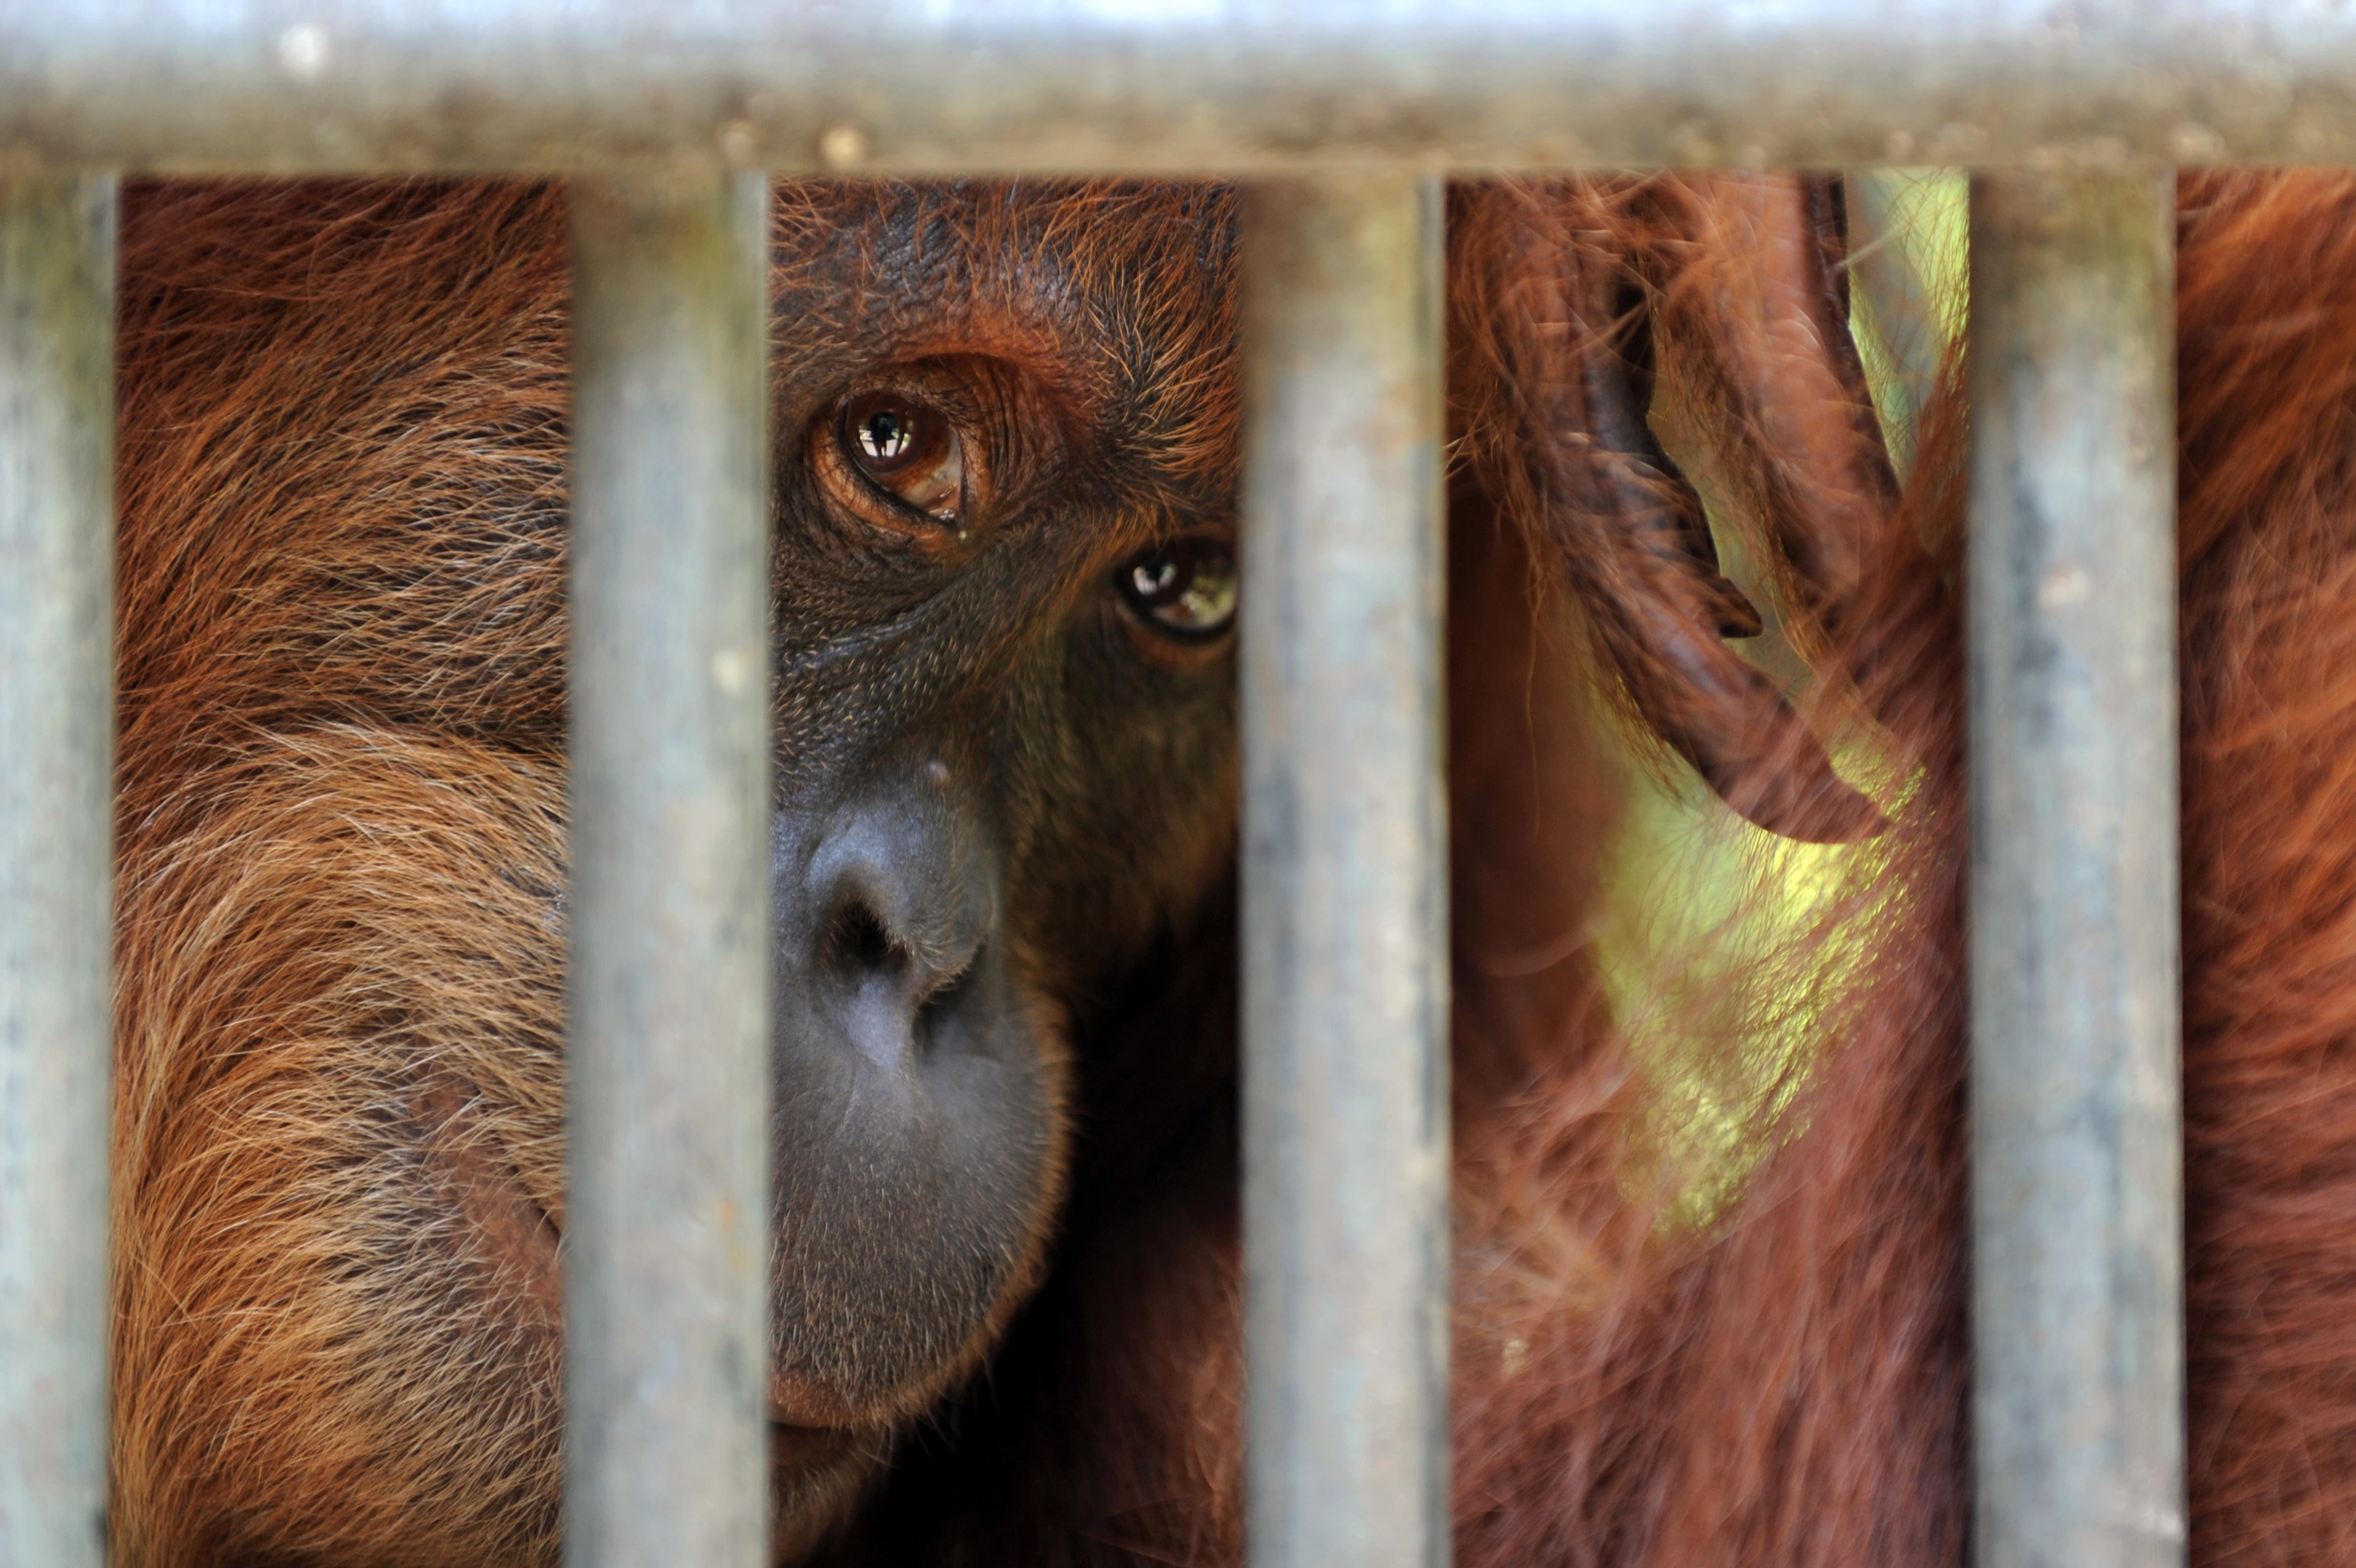 Why is it bad to keep animals in cages?